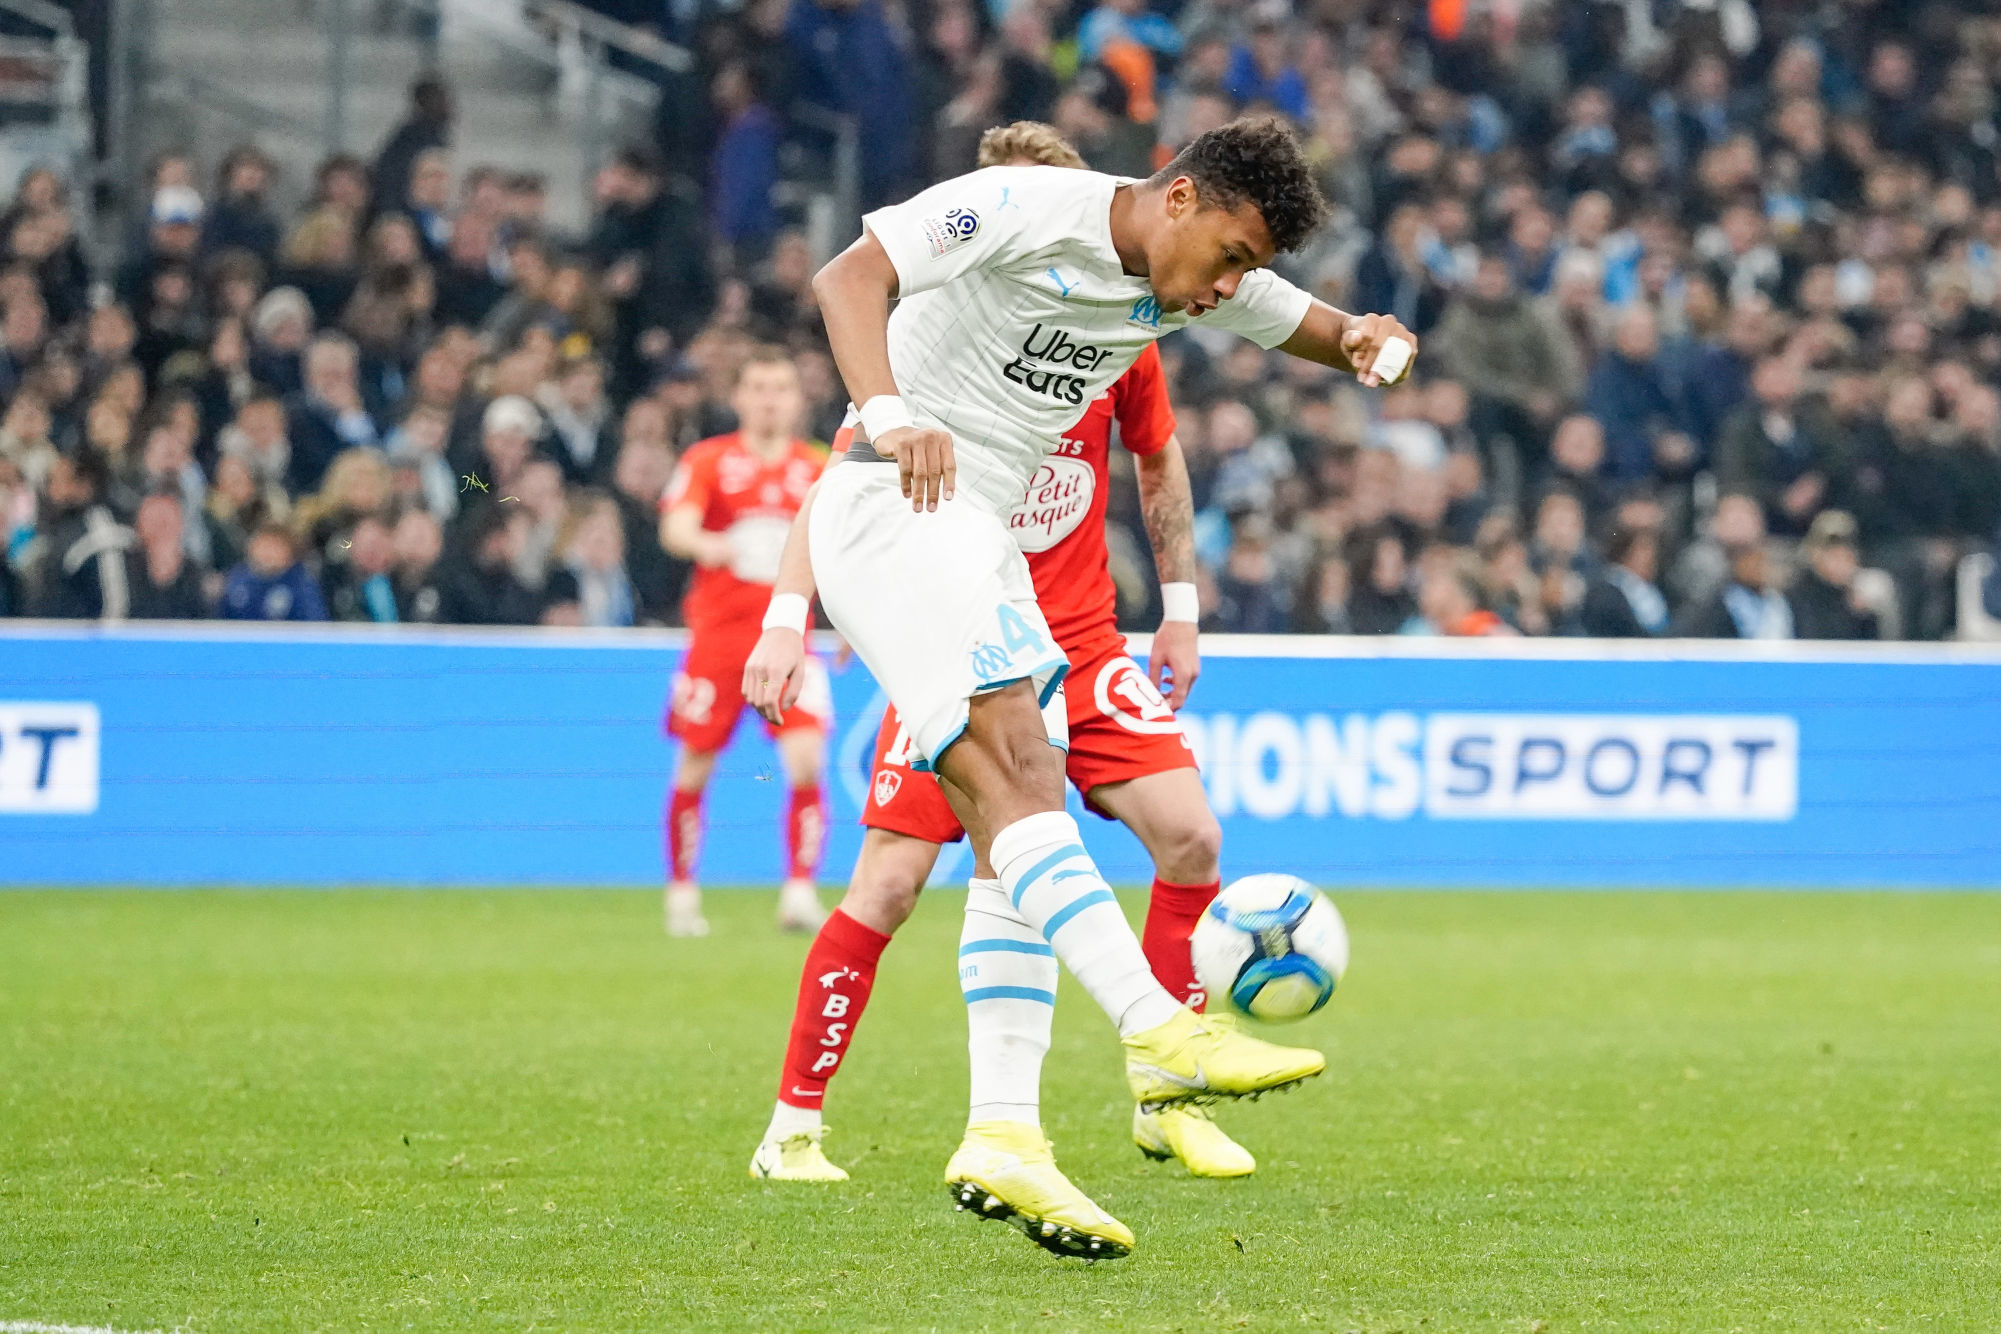 Boubacar KAMARA of Marseille during the Ligue 1 match between Marseille and Brest at Stade Velodrome on November 29, 2019 in Marseille, France. (Photo by Dave Winter/Icon Sport) - Boubacar KAMARA - Orange Vélodrome - Marseille (France)